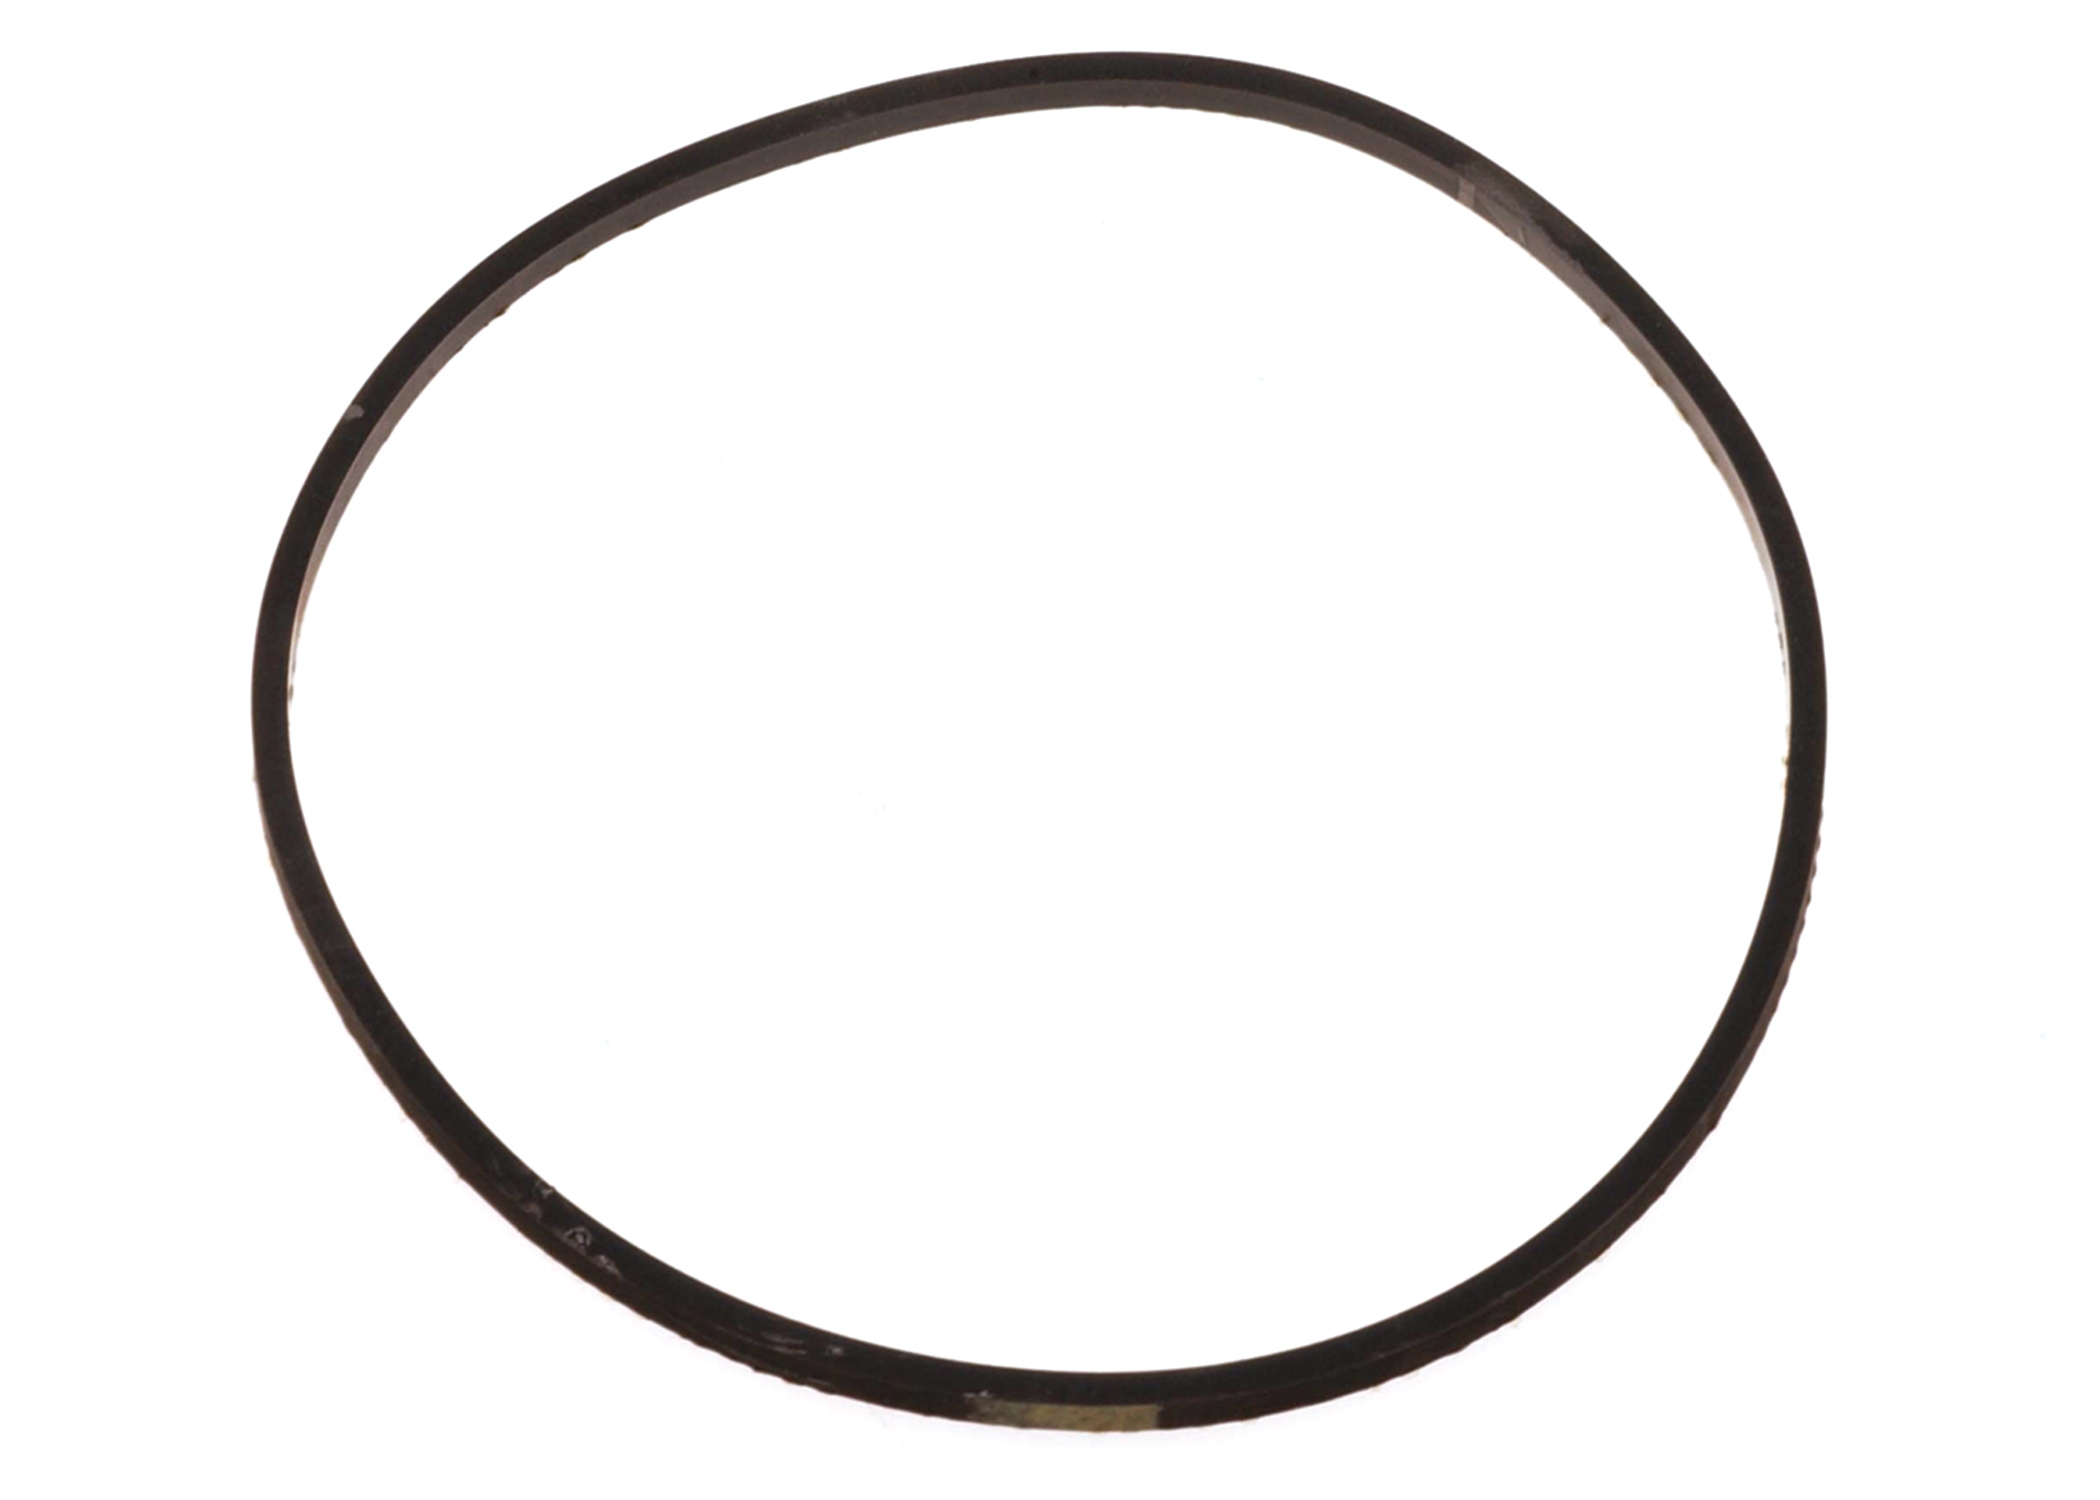 GM GENUINE PARTS - Automatic Transmission Valve Body Cover Gasket - GMP 24205119